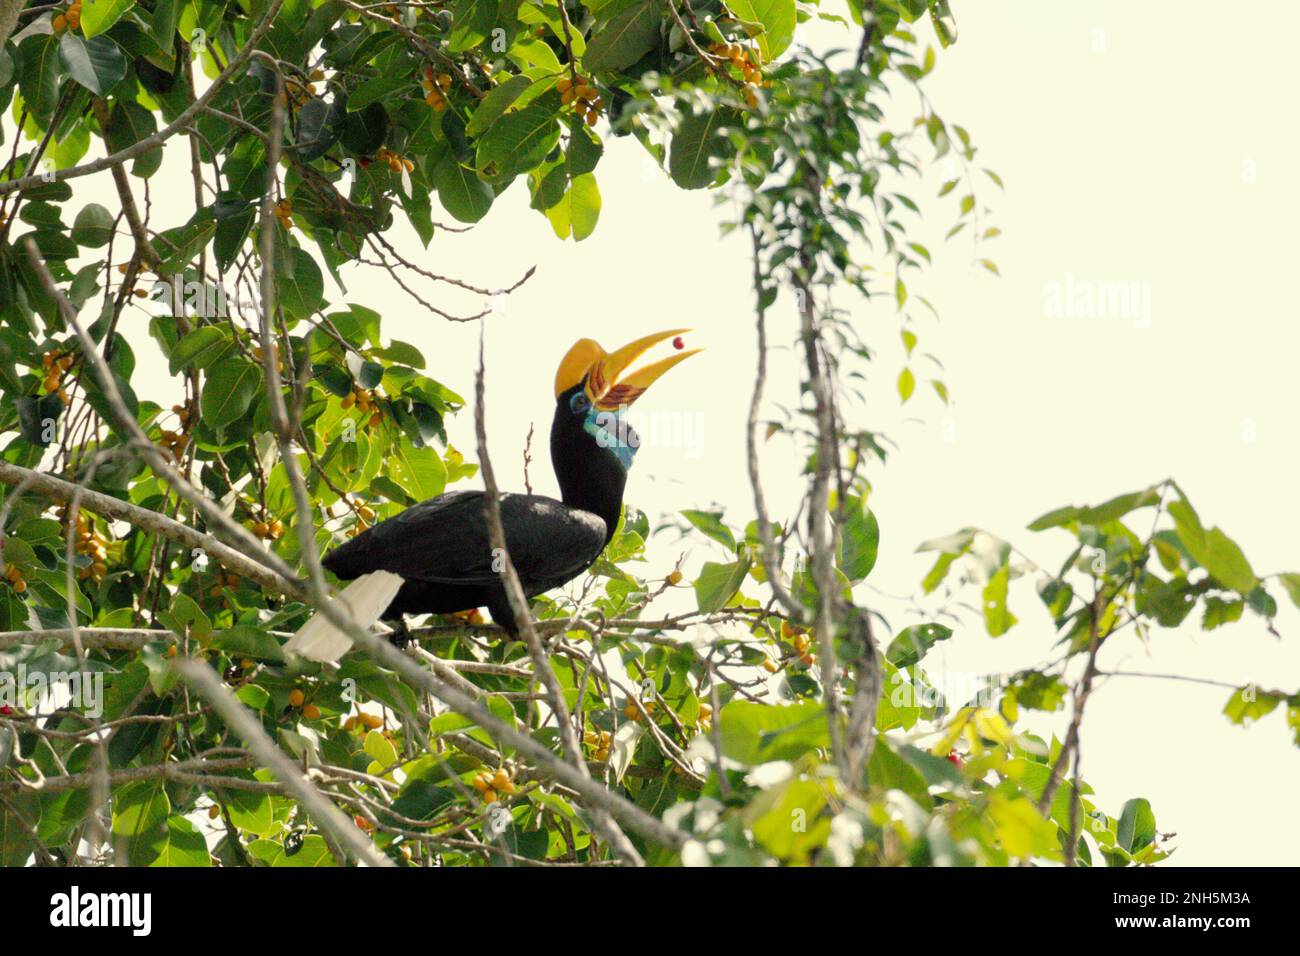 A female individual of knobbed hornbill, or sometimes called Sulawesi wrinkled hornbill (Rhyticeros cassidix), feeds on a ficus fruit as she is foraging on a fig tree in a rainforest area near Mount Tangkoko and DuaSudara in Bitung, North Sulawesi, Indonesia. Play an important role in seed dispersal—often dubbed as forest farmer by ornithologists, hornbills 'keep the cycle of the forest growing and evolving with all the fruit they consume each day,' wrote Amanda Hackett of Wildlife Conservation Society in a 2022 publication. Stock Photo